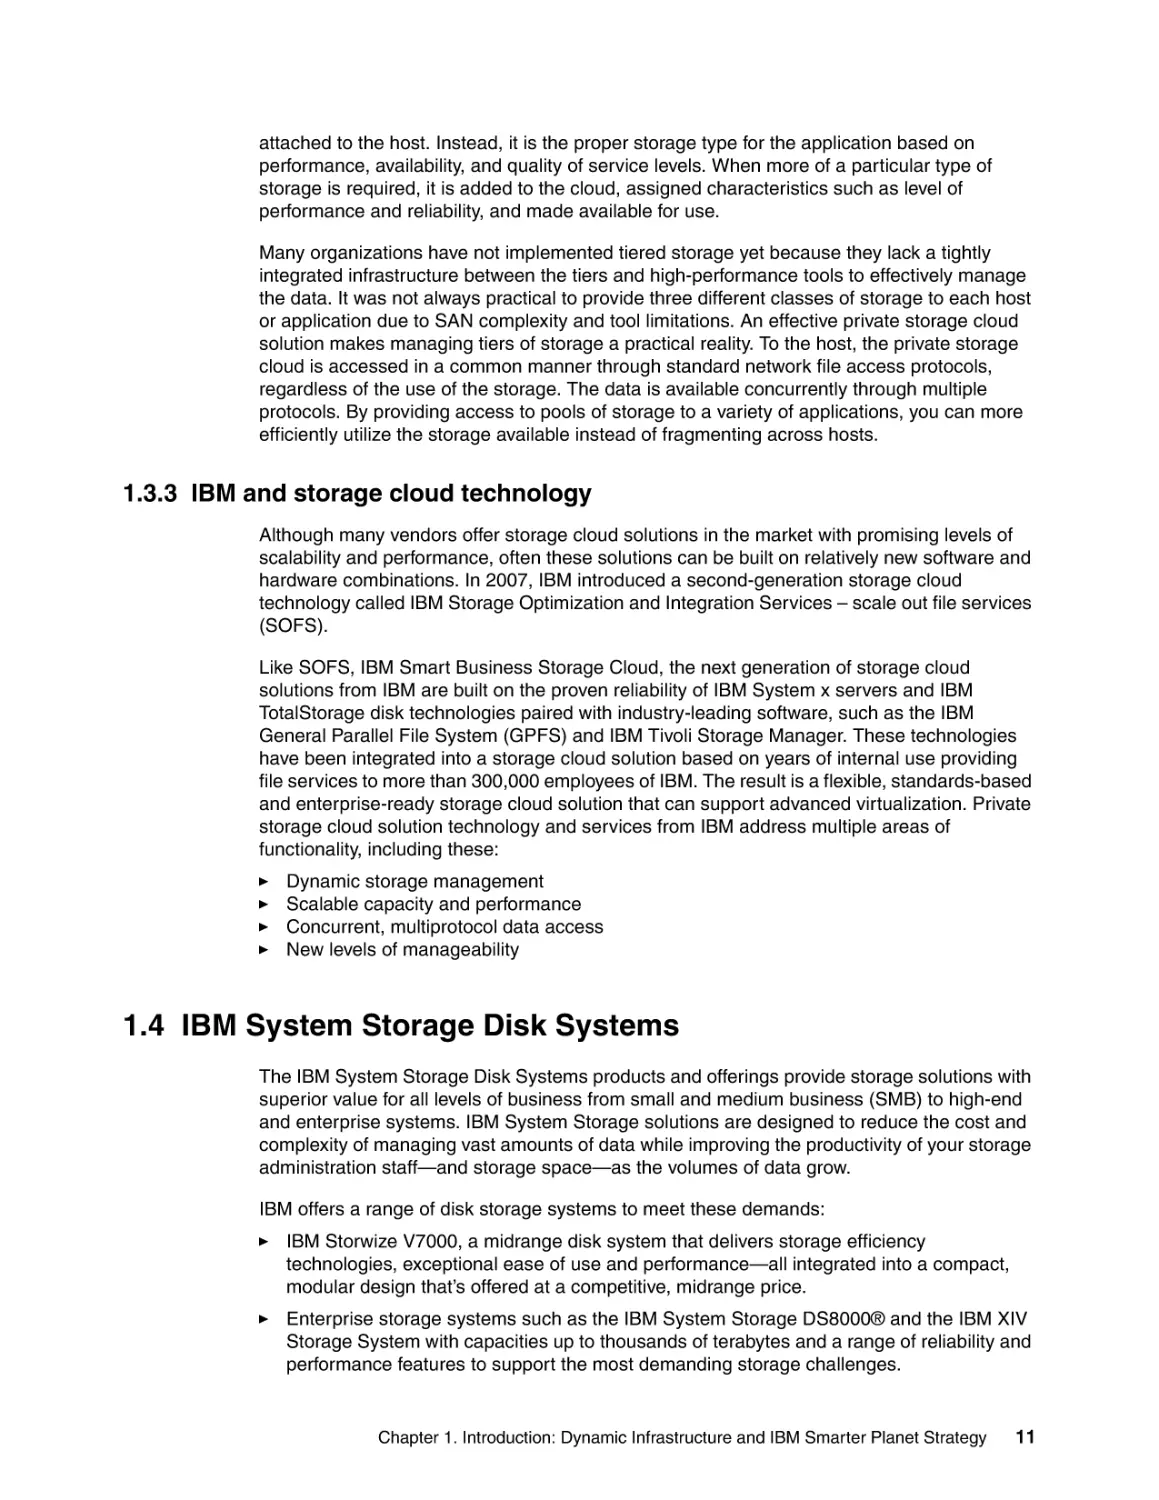 1.3.3 IBM and storage cloud technology
1.4 IBM System Storage Disk Systems